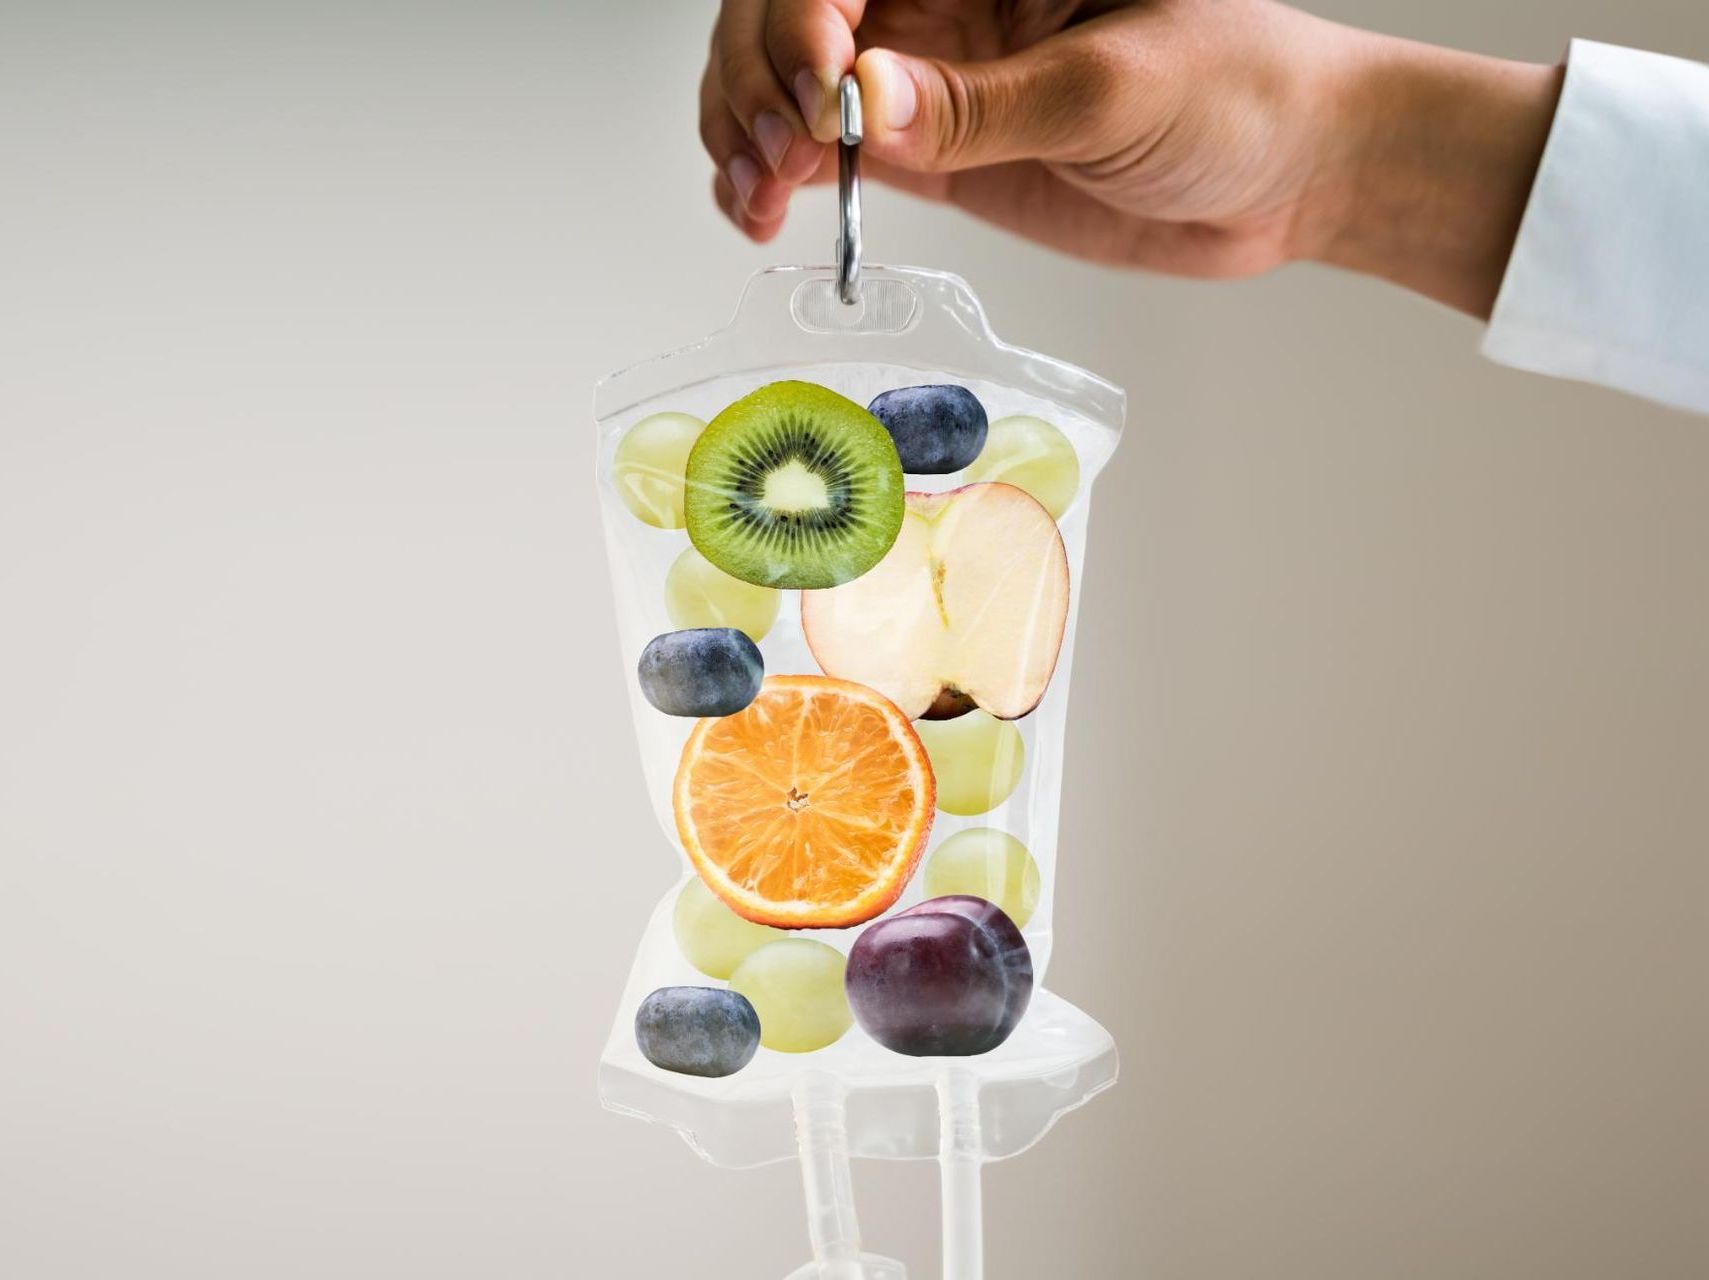 a person's hand holding IV bag with fruit